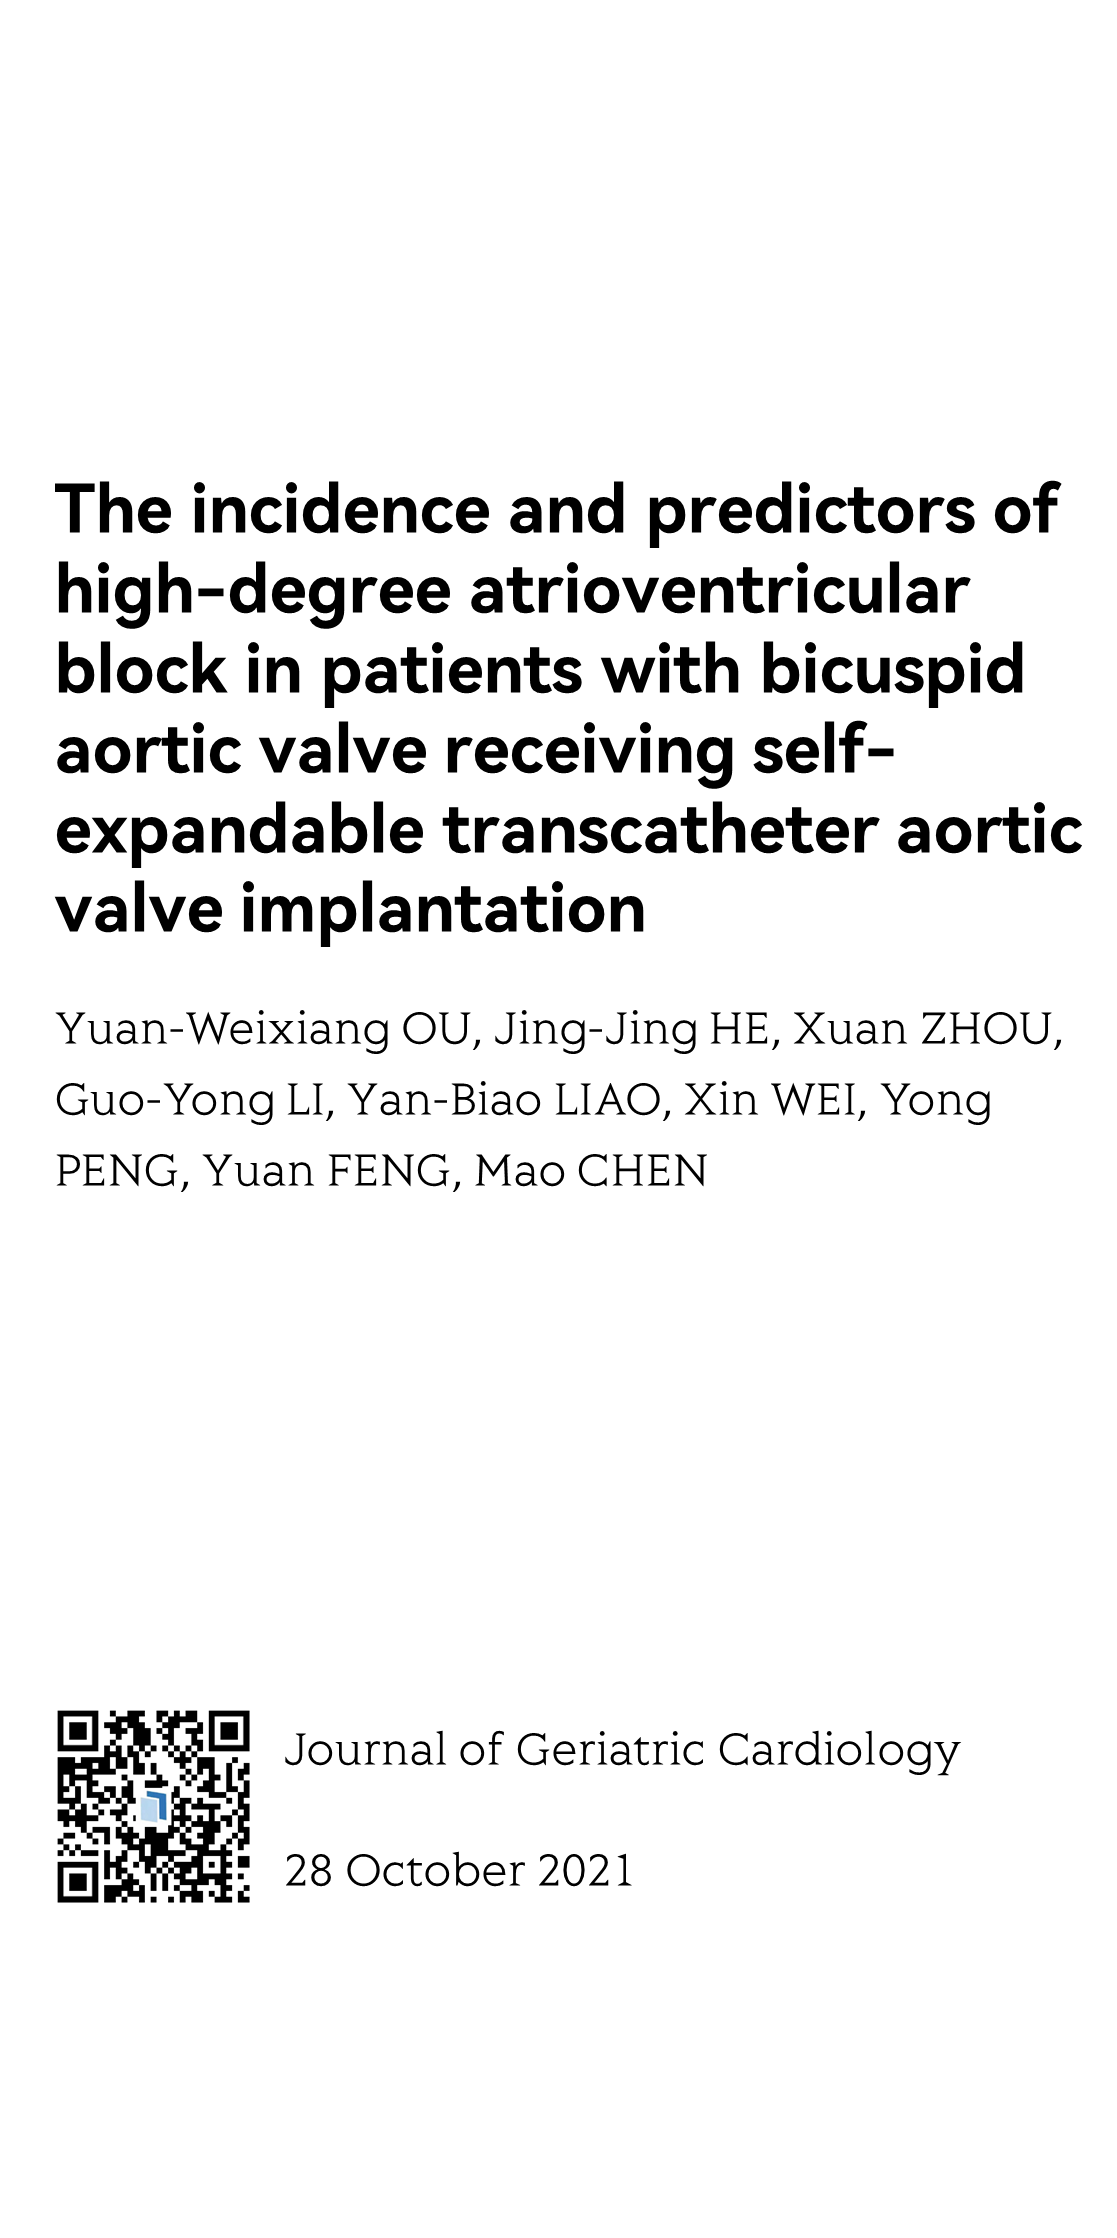 The incidence and predictors of high-degree atrioventricular block in patients with bicuspid aortic valve receiving self-expandable transcatheter aortic valve implantation_1